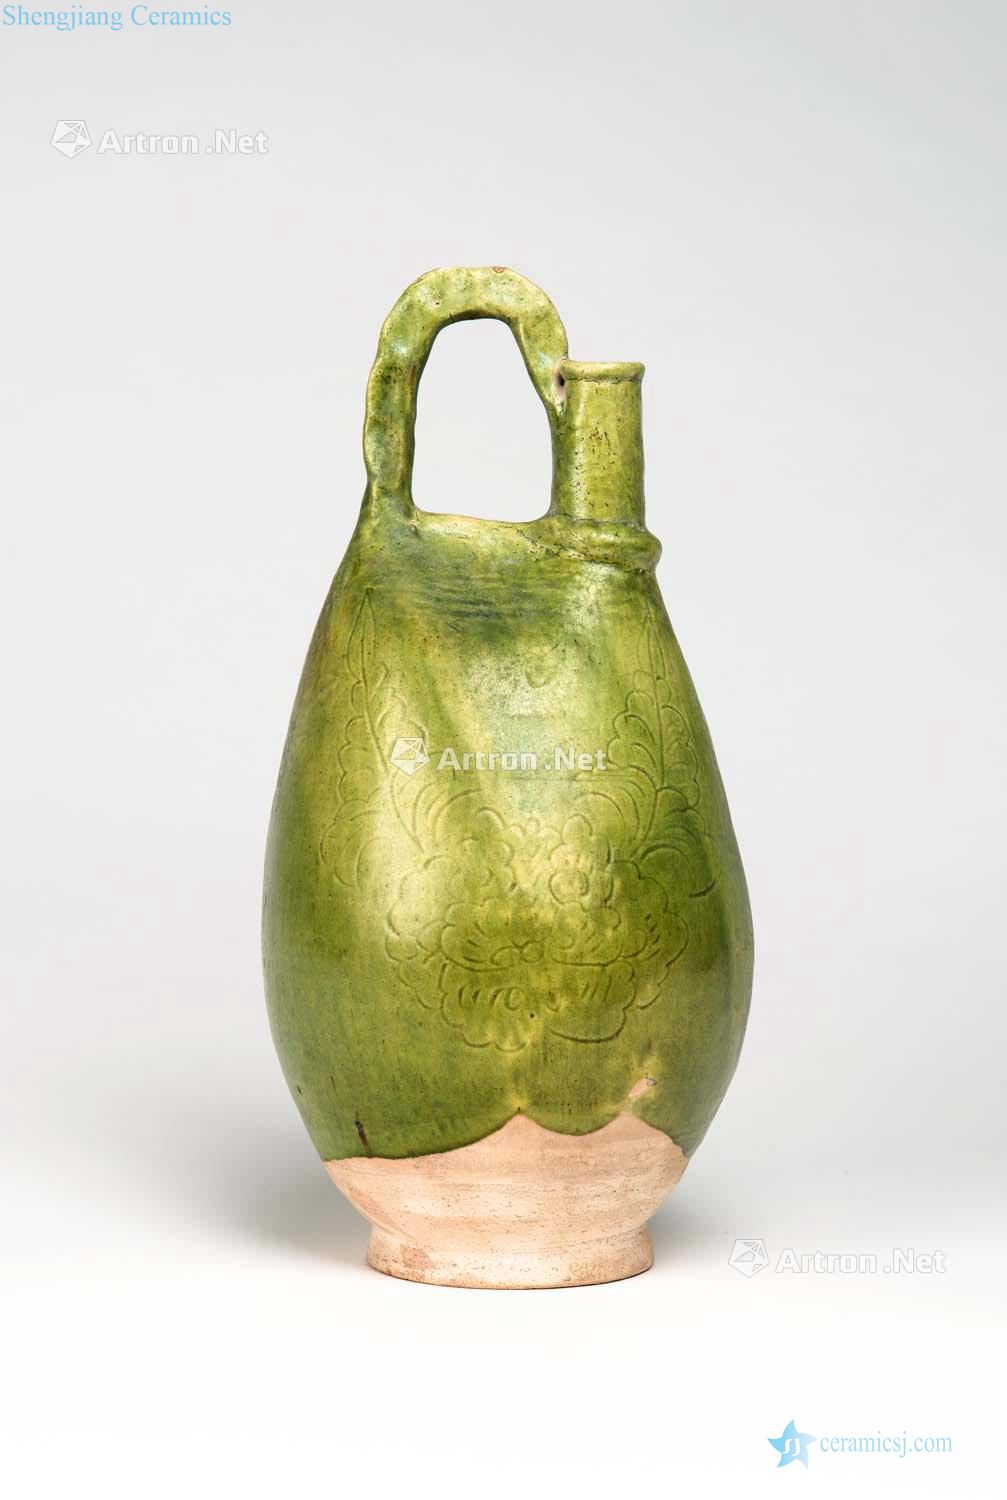 About liao or even later Green glazed pot